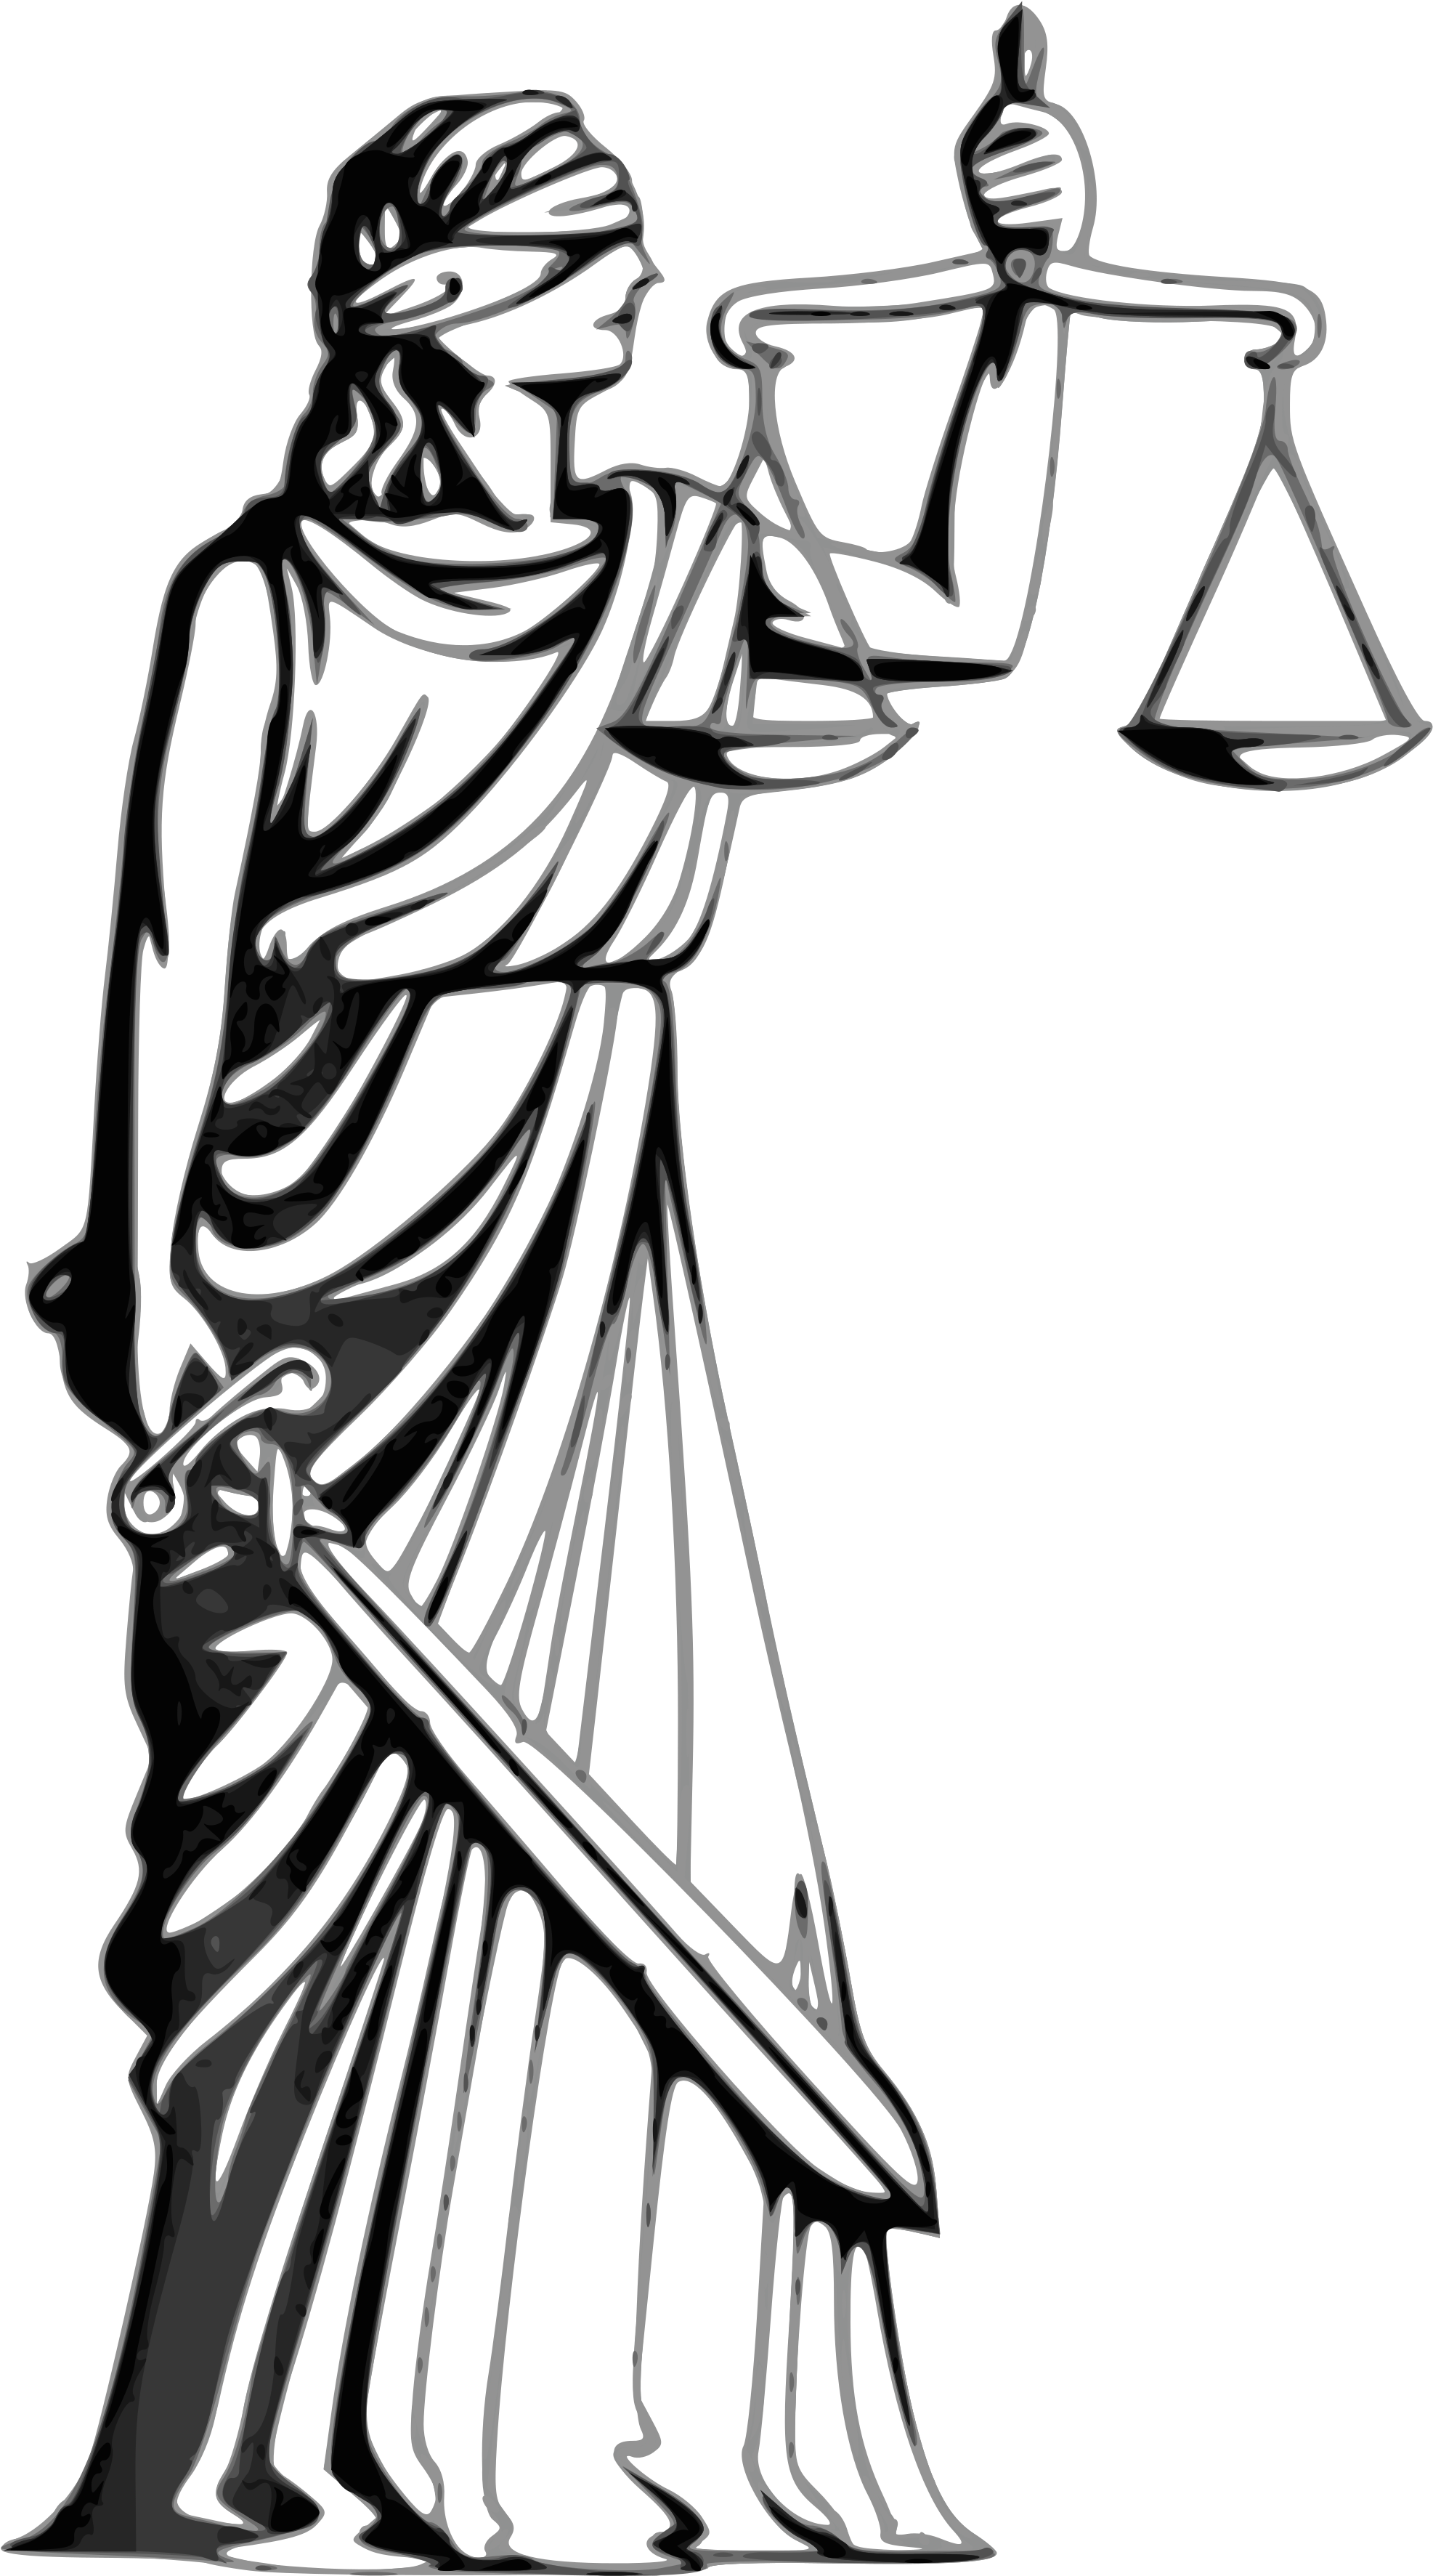 No "fairness Through Unawareness" - Lady Justice White Background (2000x3605)